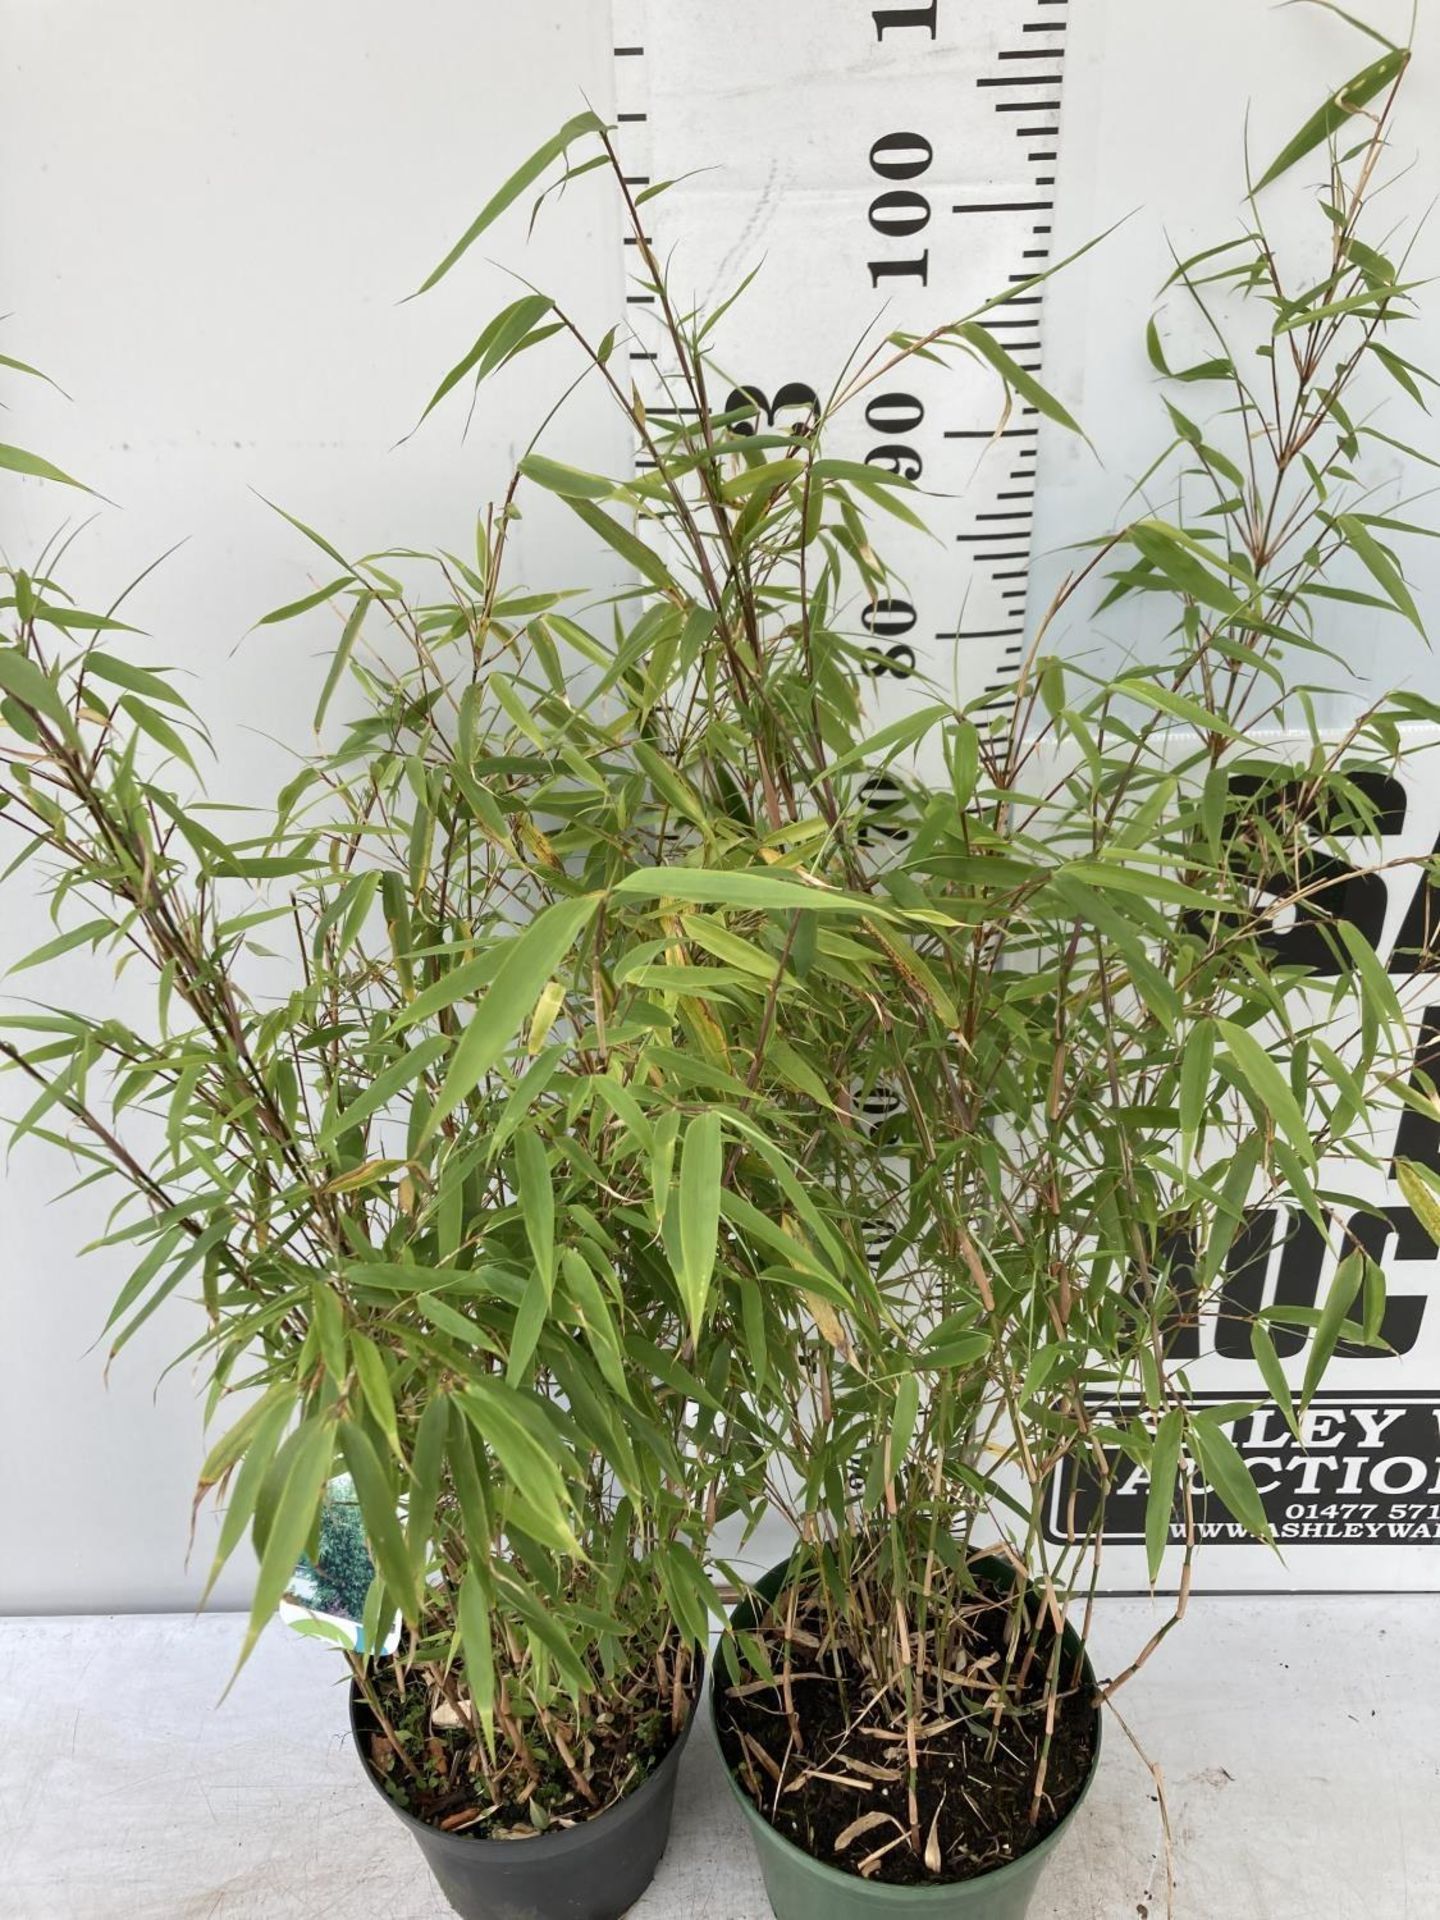 TWO BAMBOO FARGESIA 'NITIDA' APPROX 120CM IN HEIGHT IN 4 LTR POTS PLUS VAT TO BE SOLD FOR THE TWO - Image 3 of 6